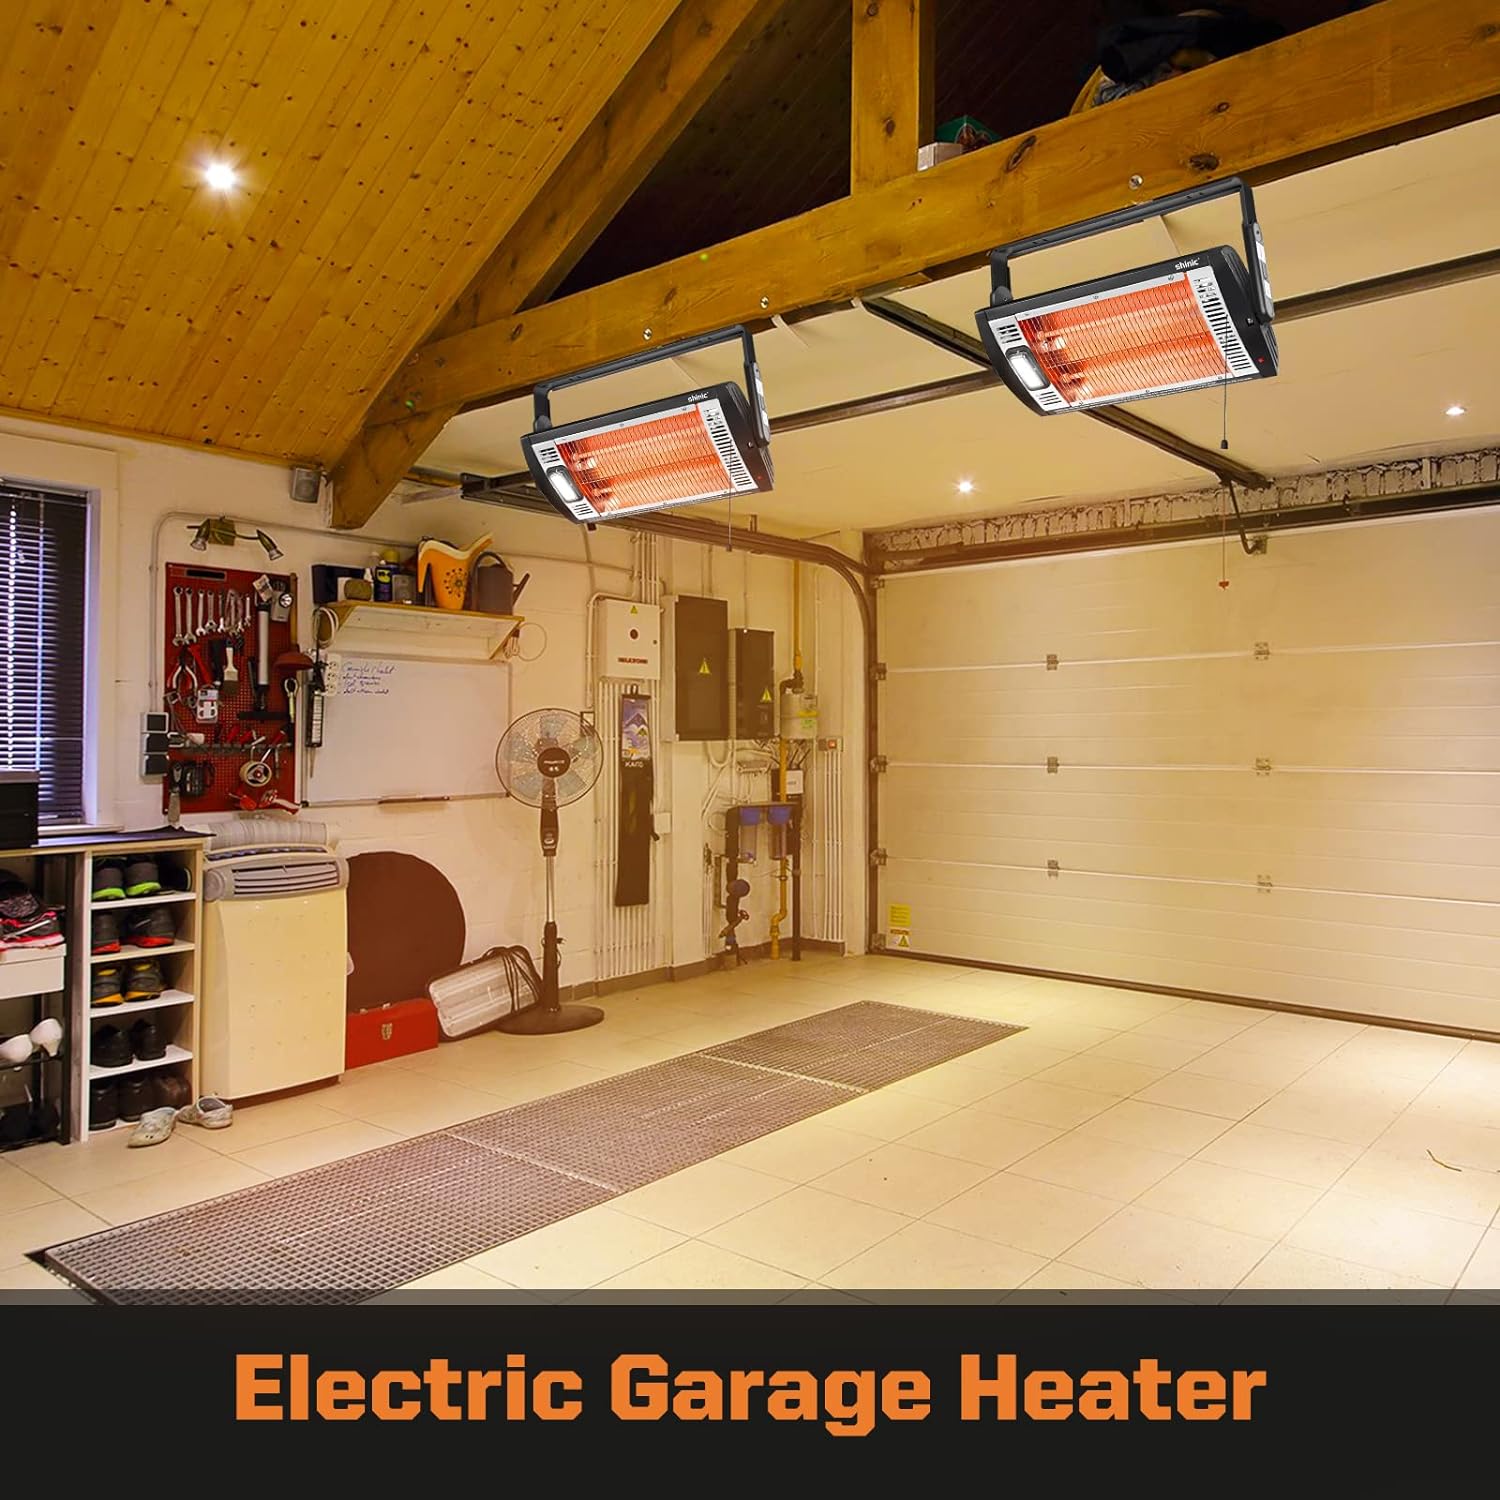 Electric Garage Heaters for Indoor Use, 1500W/750W Ceiling Mounted Radiant Quartz Heater with Work Light, 90° Rotation, 5 Mode Settings, Electric Heater for Garage, Shop, Patio Large Room